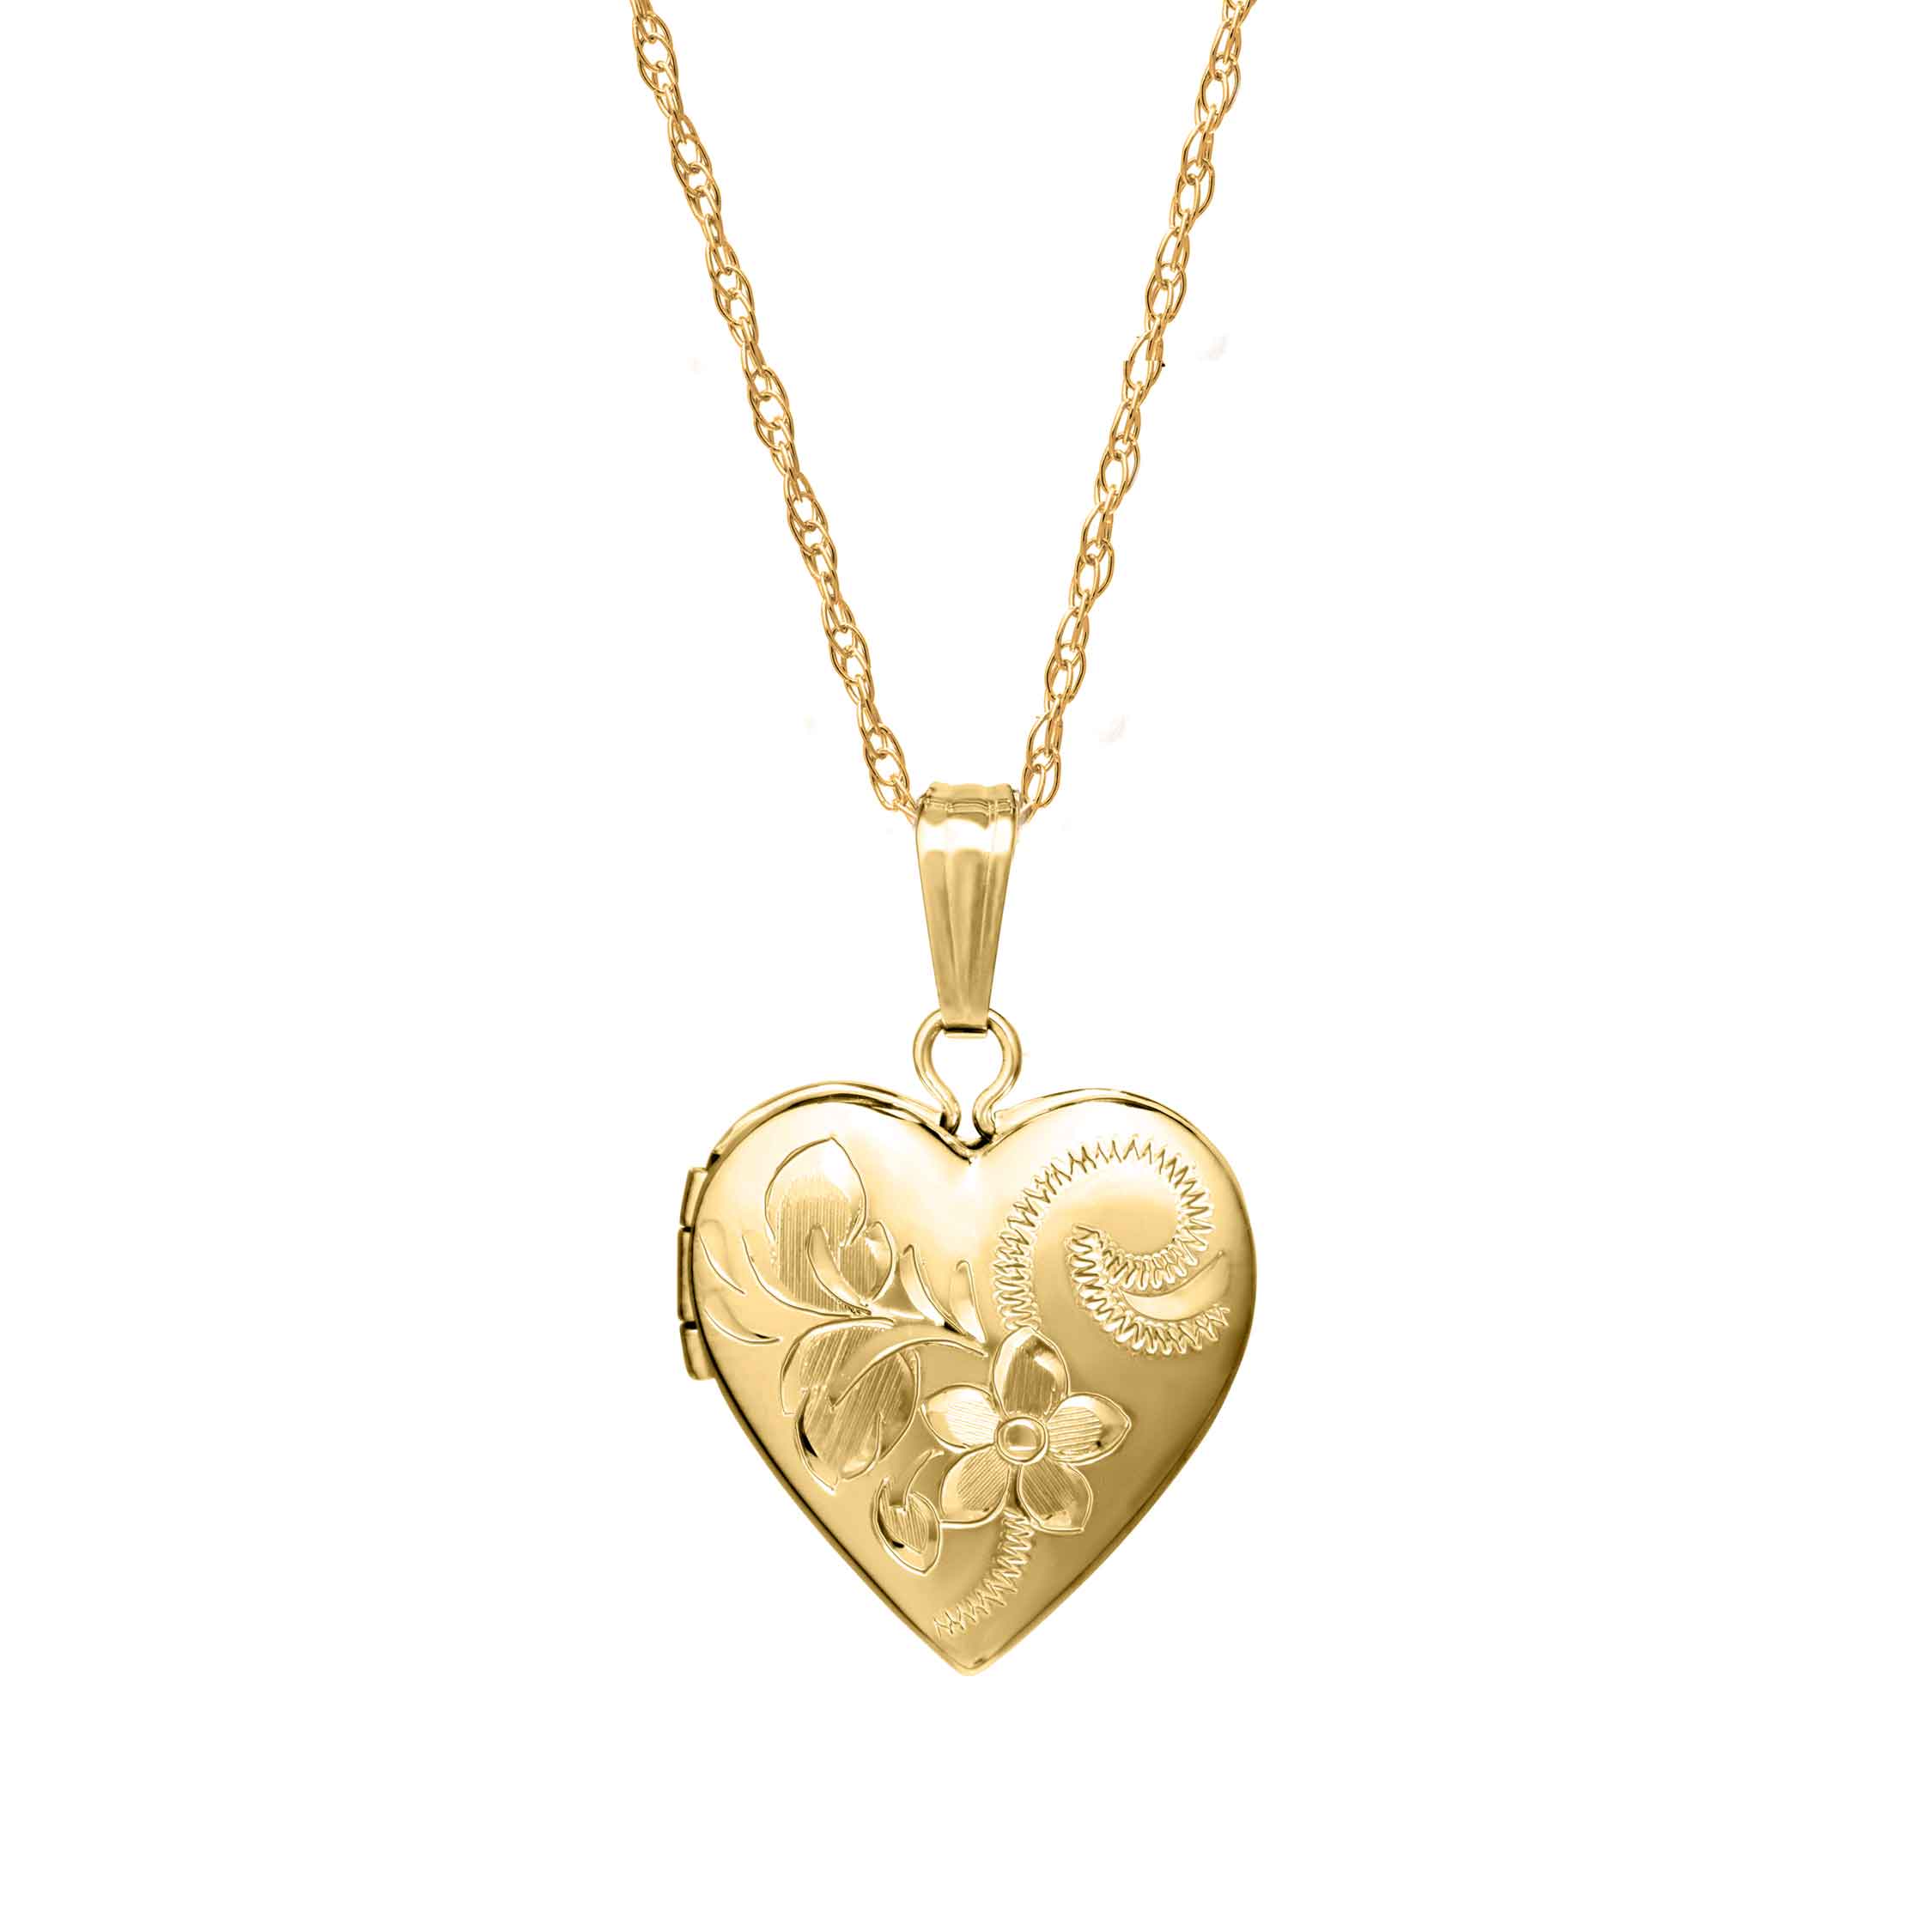 Engraved Sterling Silver Heart Necklace